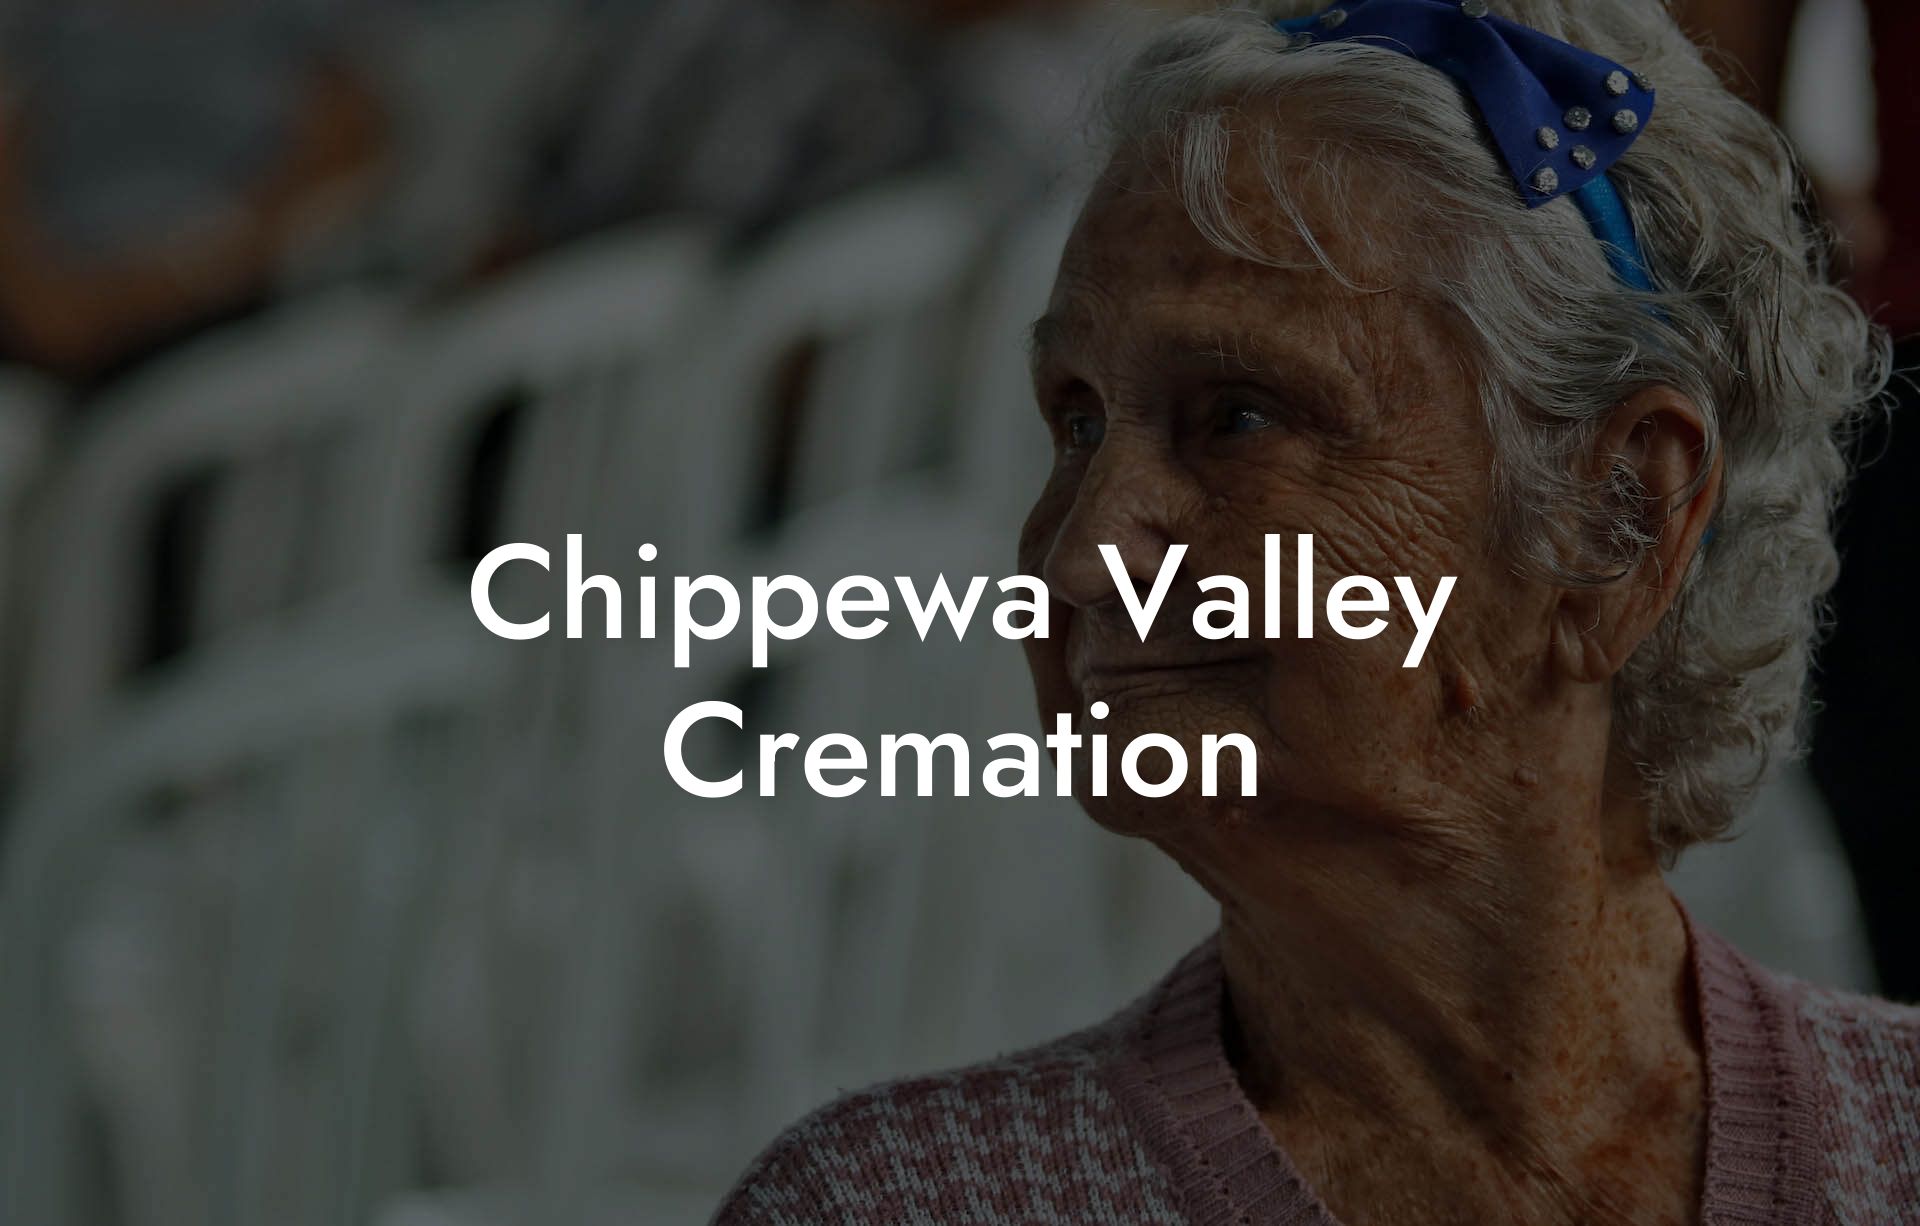 Chippewa Valley Cremation